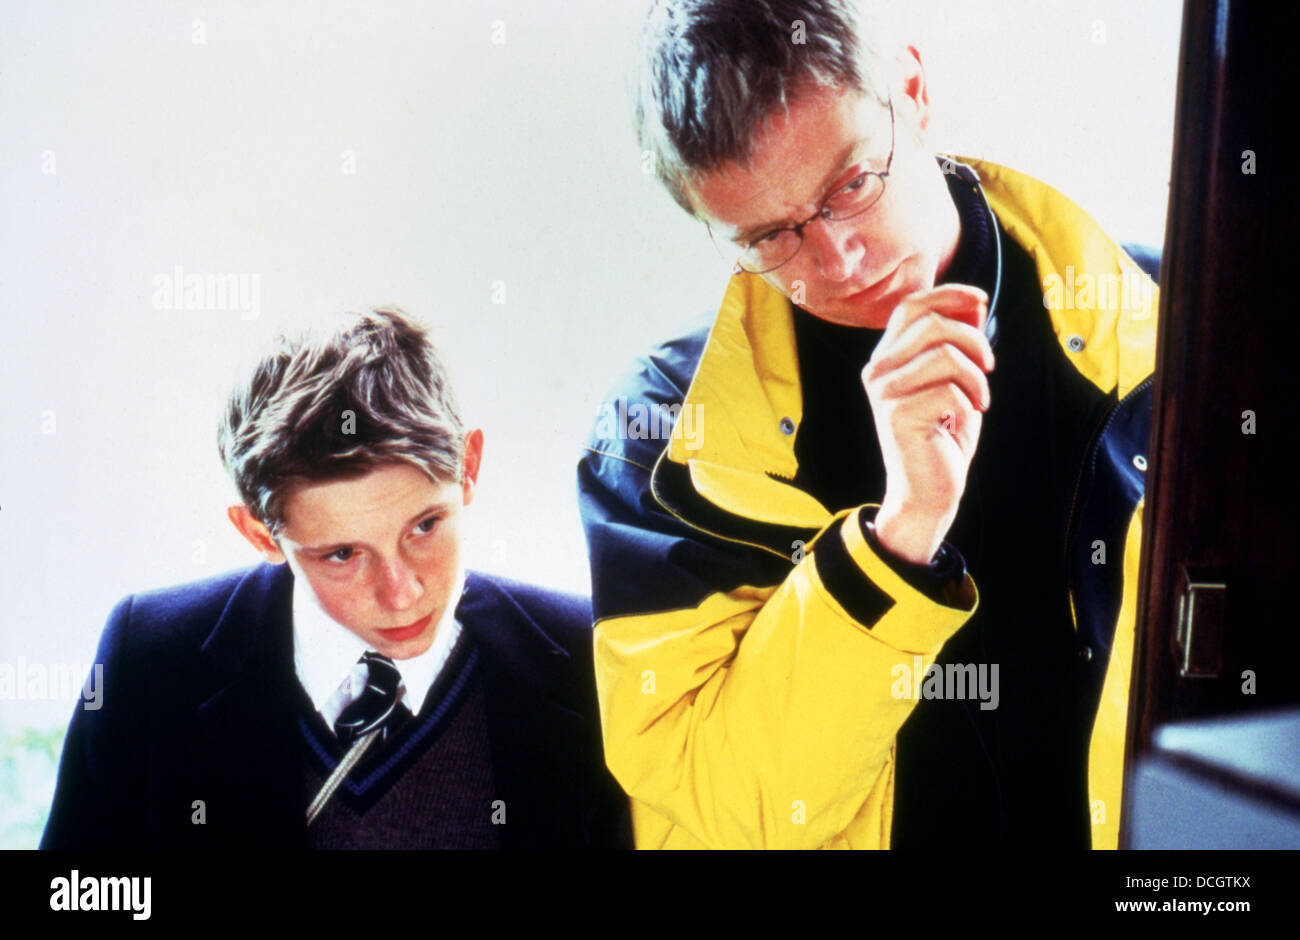 STEPHEN DALDRY (DIRECTOR) ON SET 'BILLY ELLIOT (2000)' WITH JAMIE BELL DALY 001 MOVIESTORE COLLECTION LTD Stock Photo